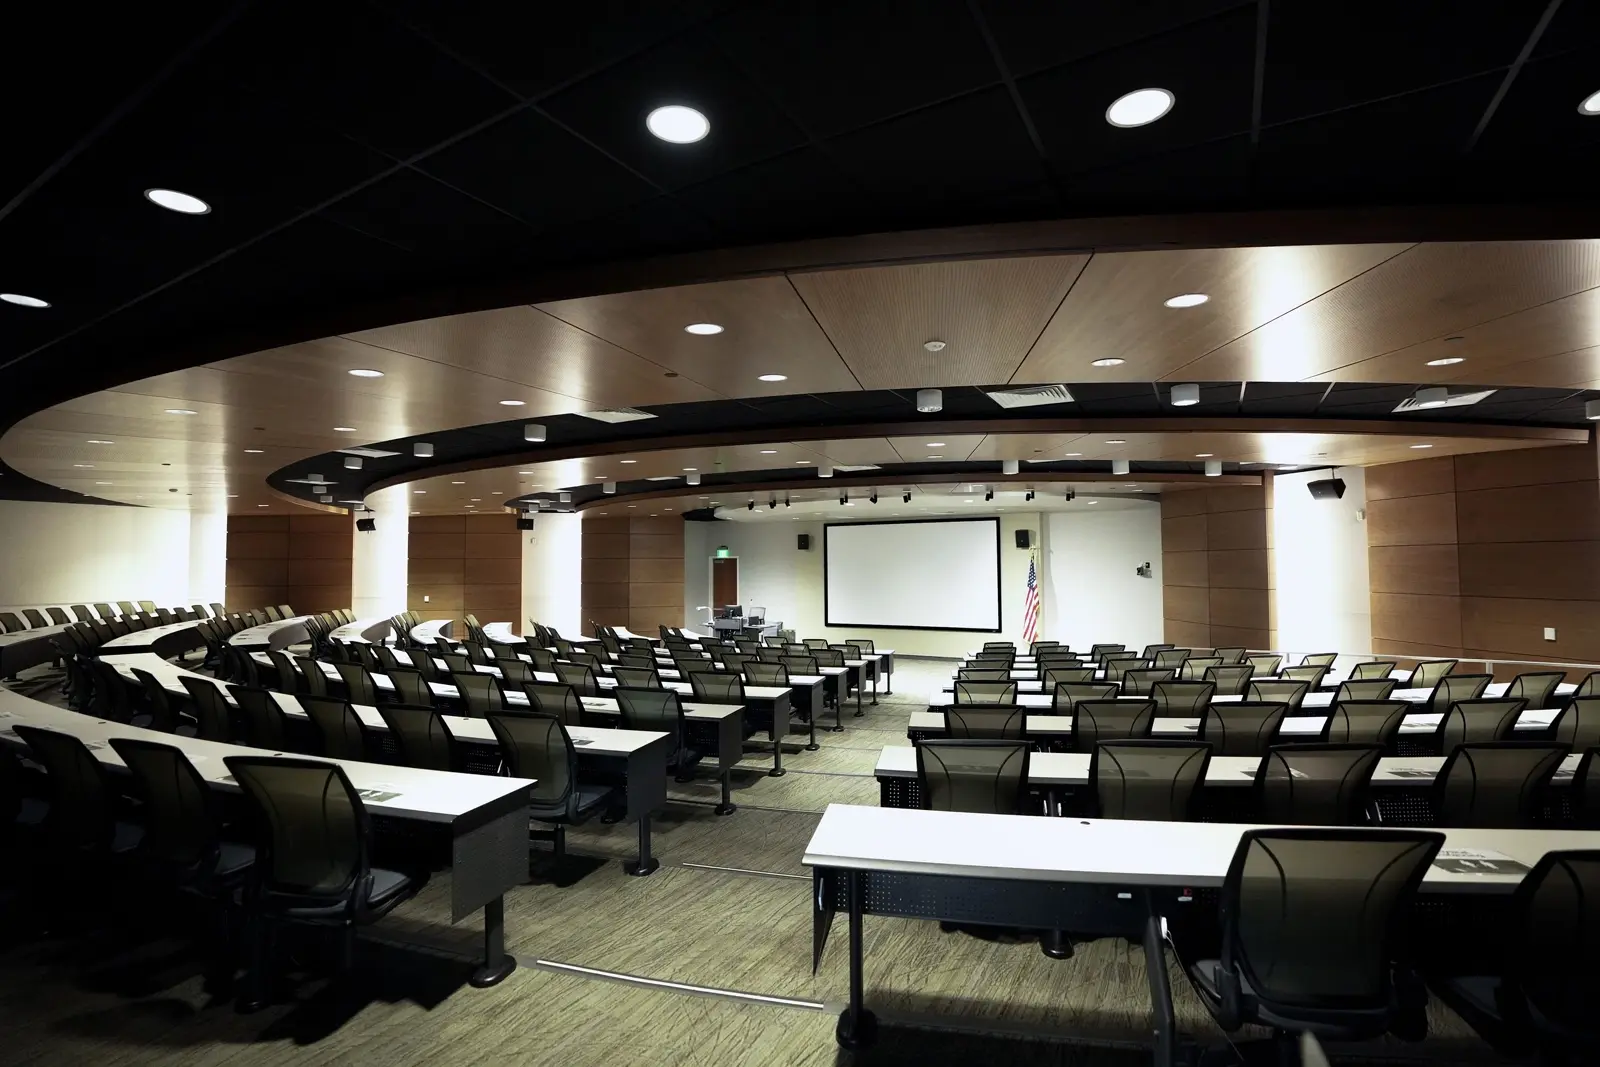 CAMLS A large, modern lecture hall with a curved layout, equipped with rows of desks and black mesh chairs. A projection screen, an American flag, and a podium are visible at the front. The ceiling features recessed lighting. The hall is empty.